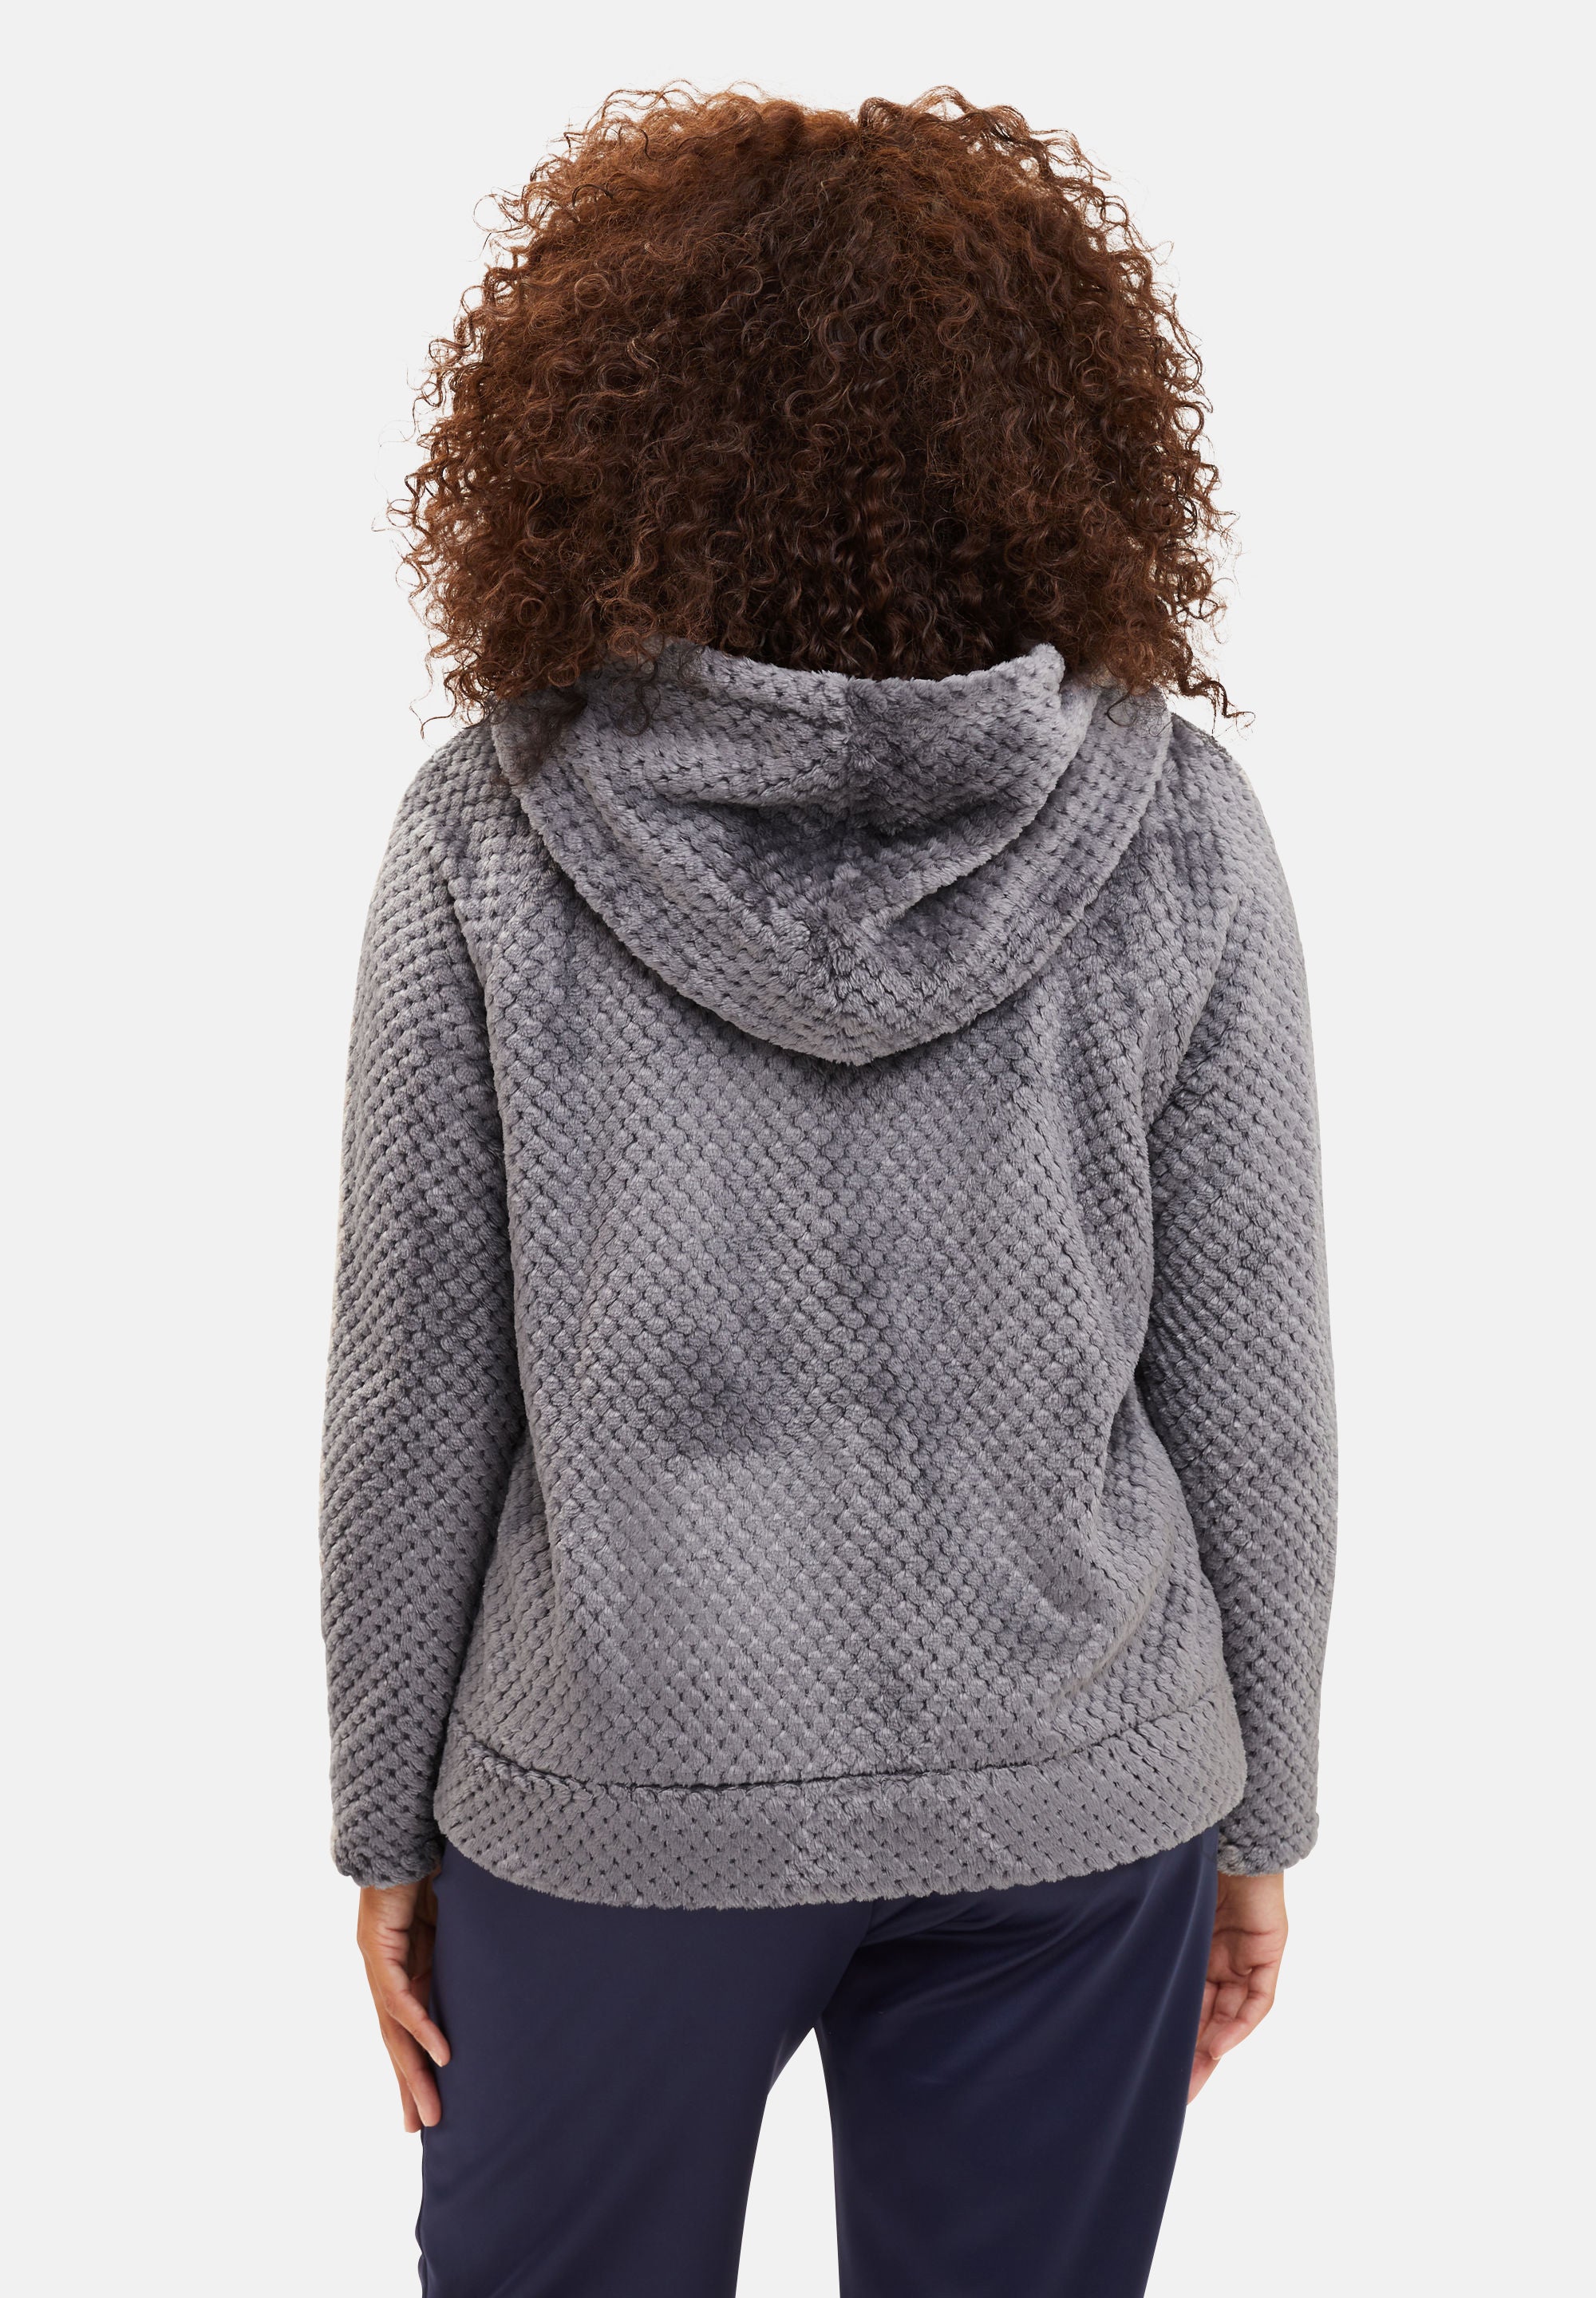 Vest with sleeves Hug Storm Gray